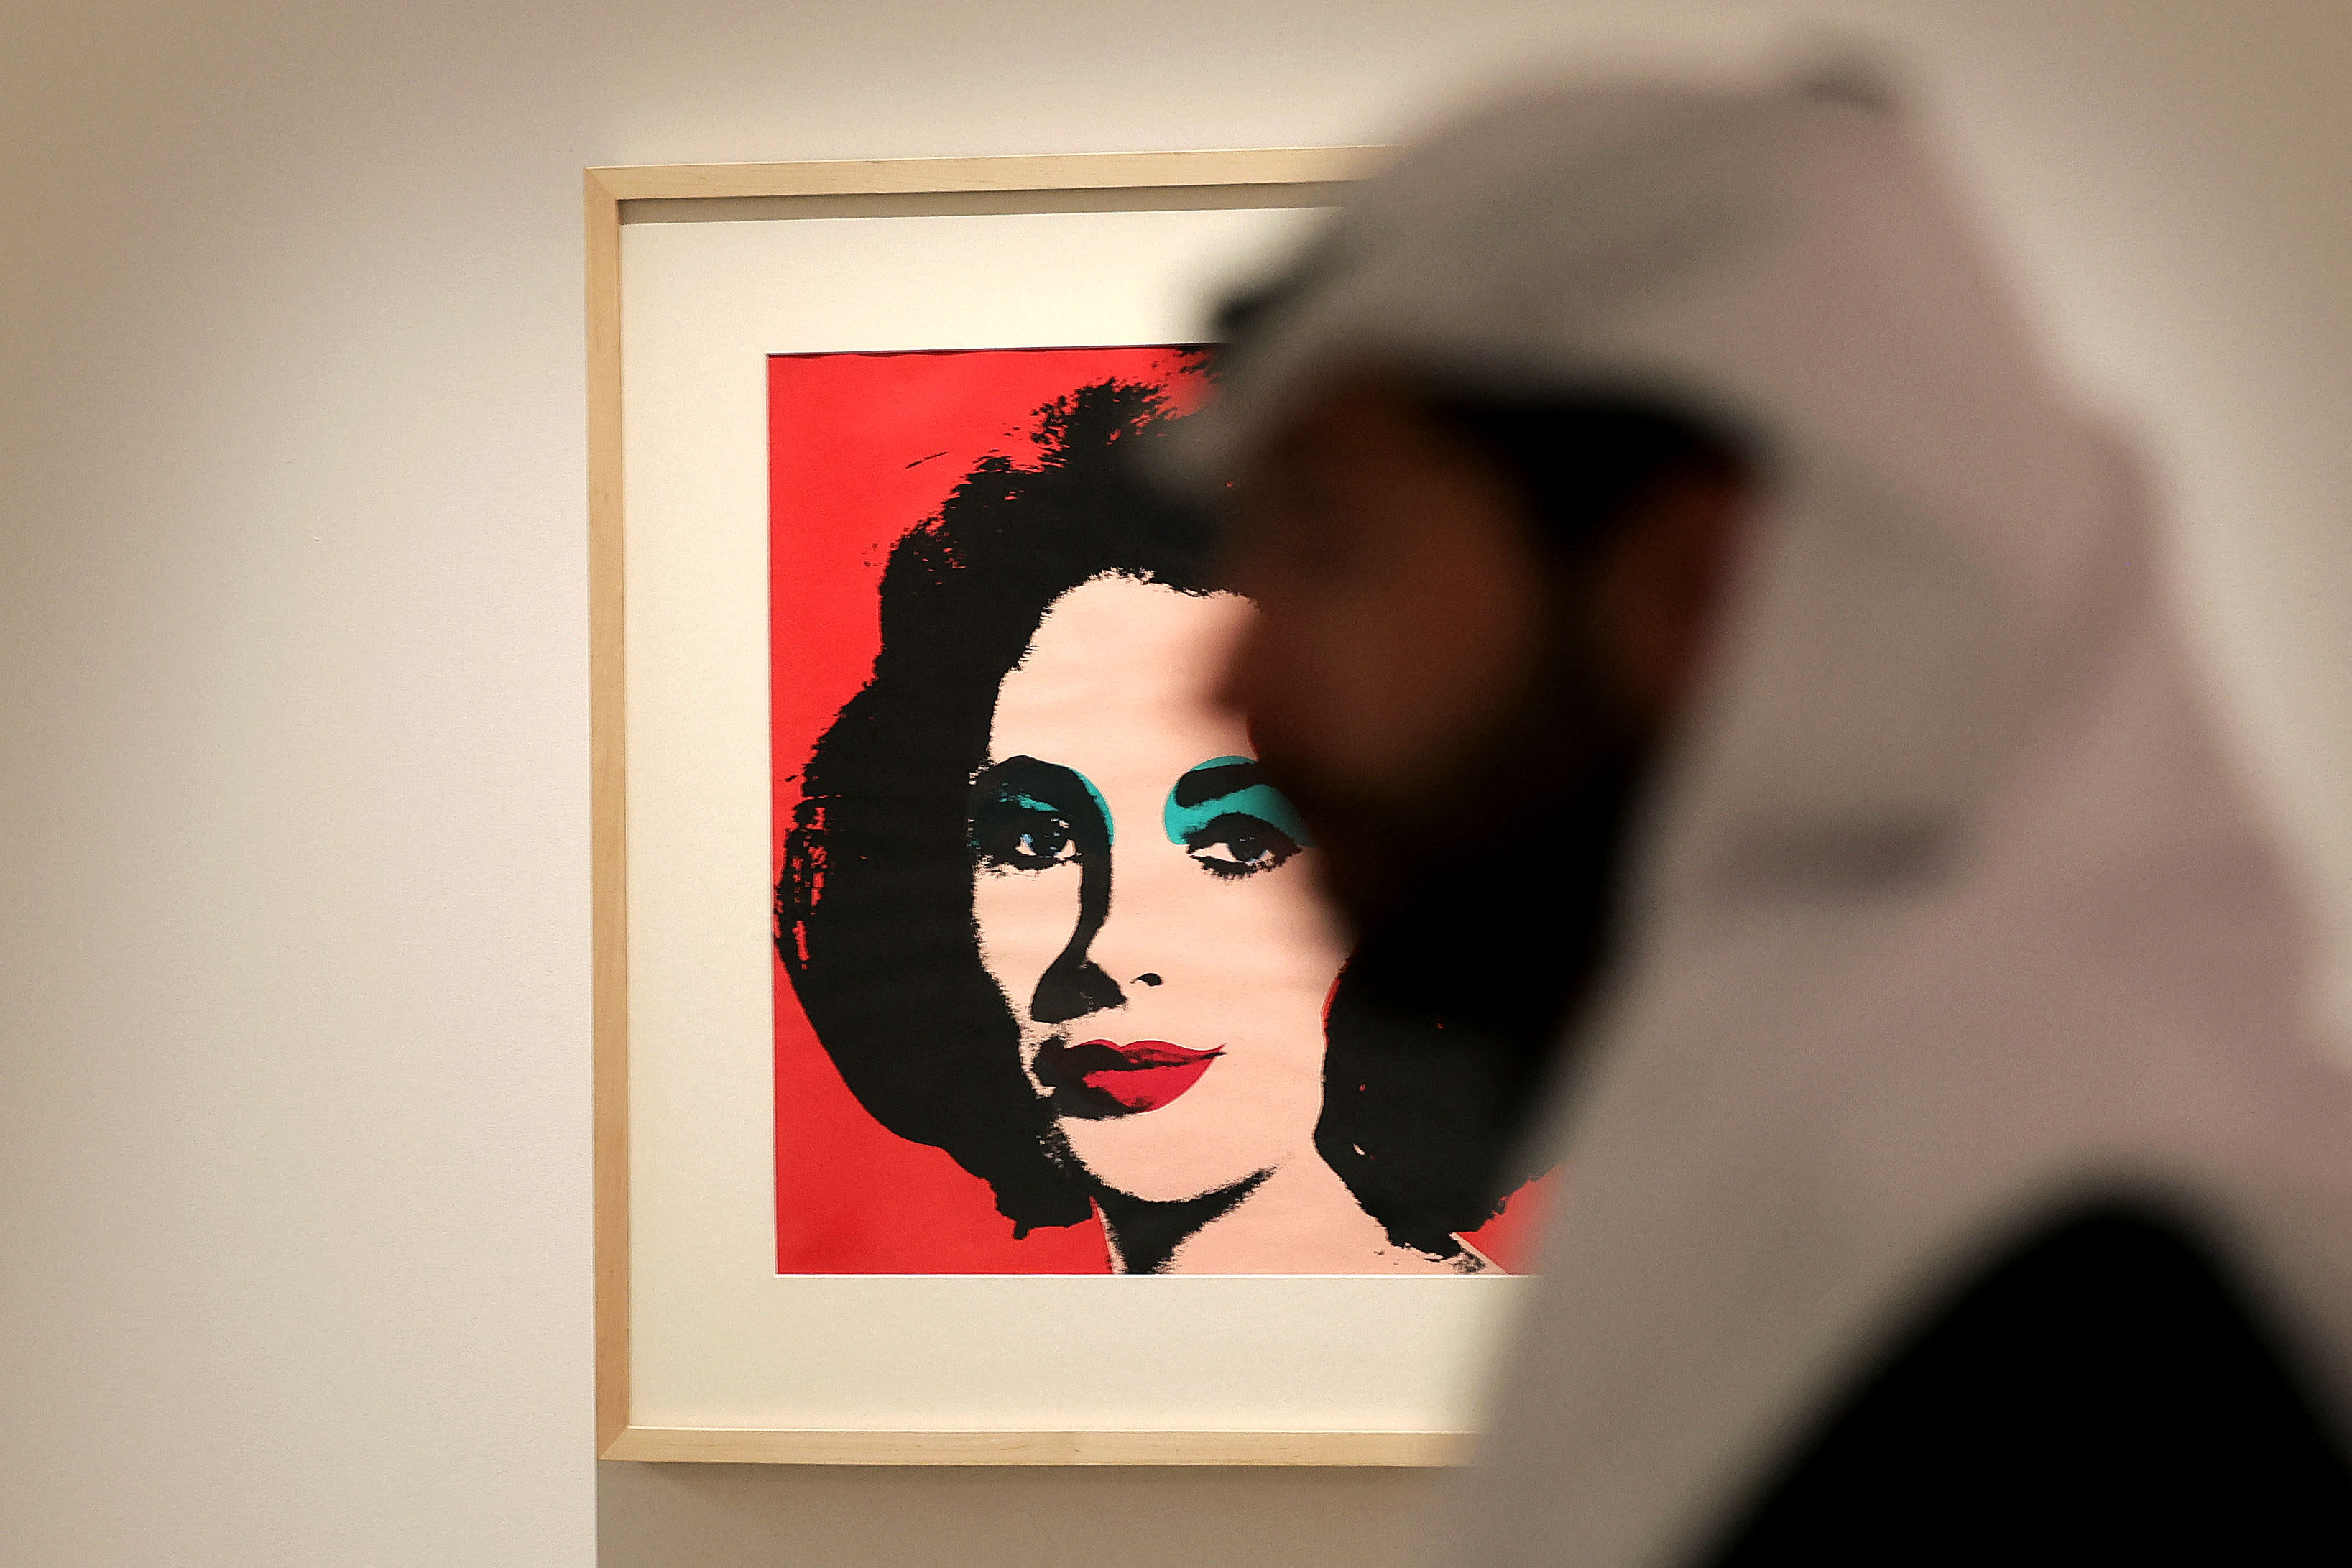 A man visits an exhibition of works by the late US artist Andy Warhol at the Maraya concert hall in Al-‘Ula, Saudi Arabia, on February 19, 2023. Photo: AFP